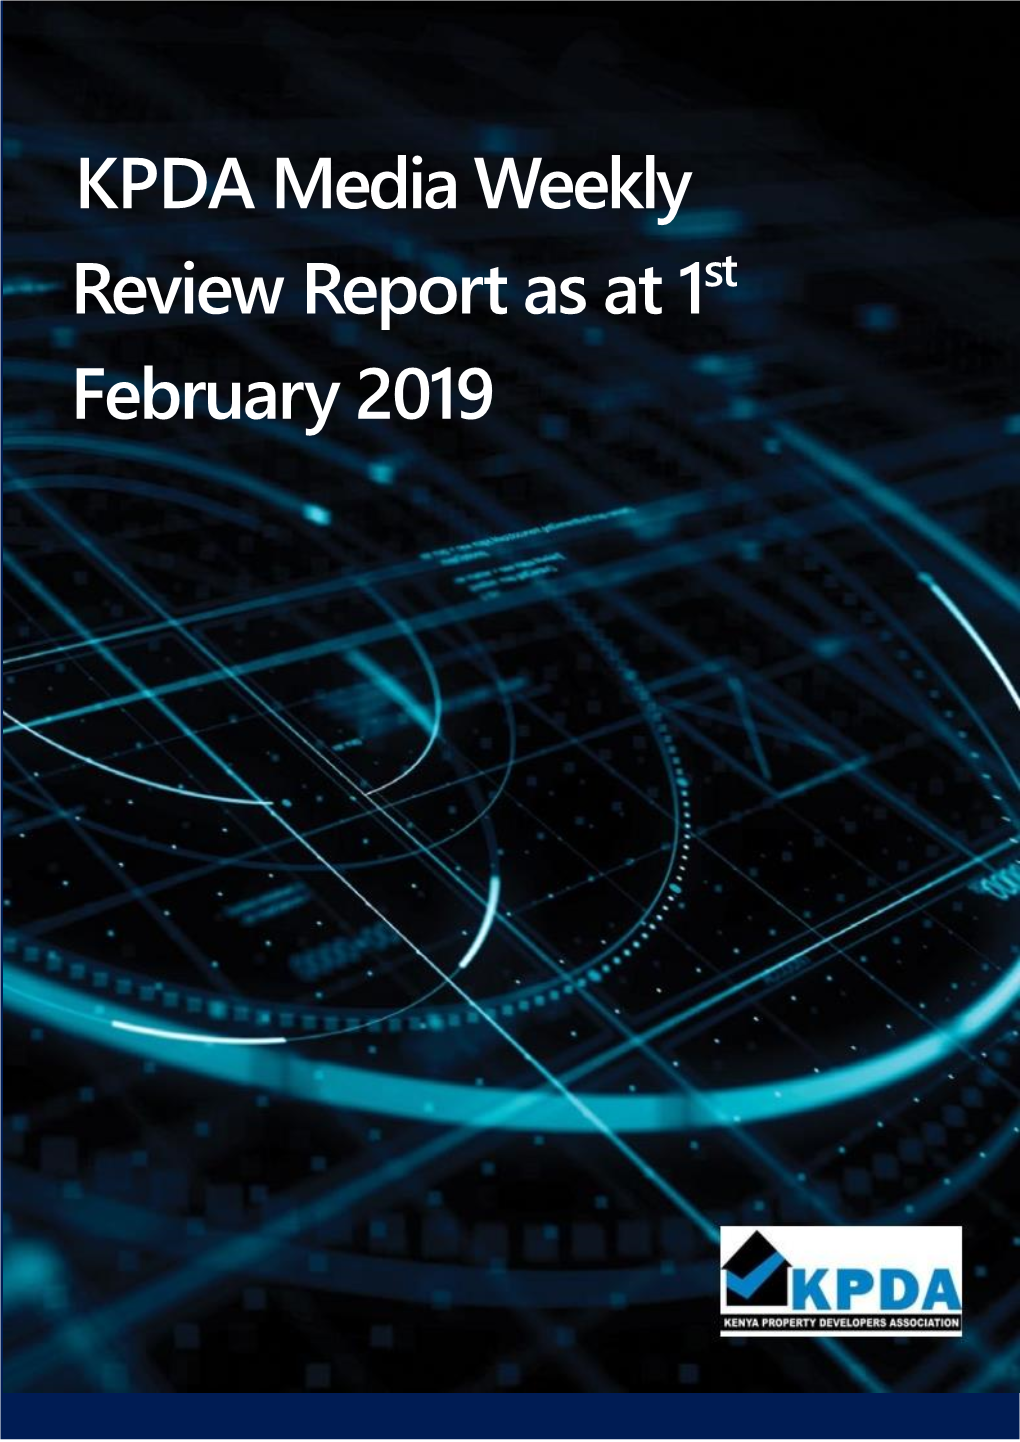 KPDA Media Weekly Review Report As at 1St February 2019